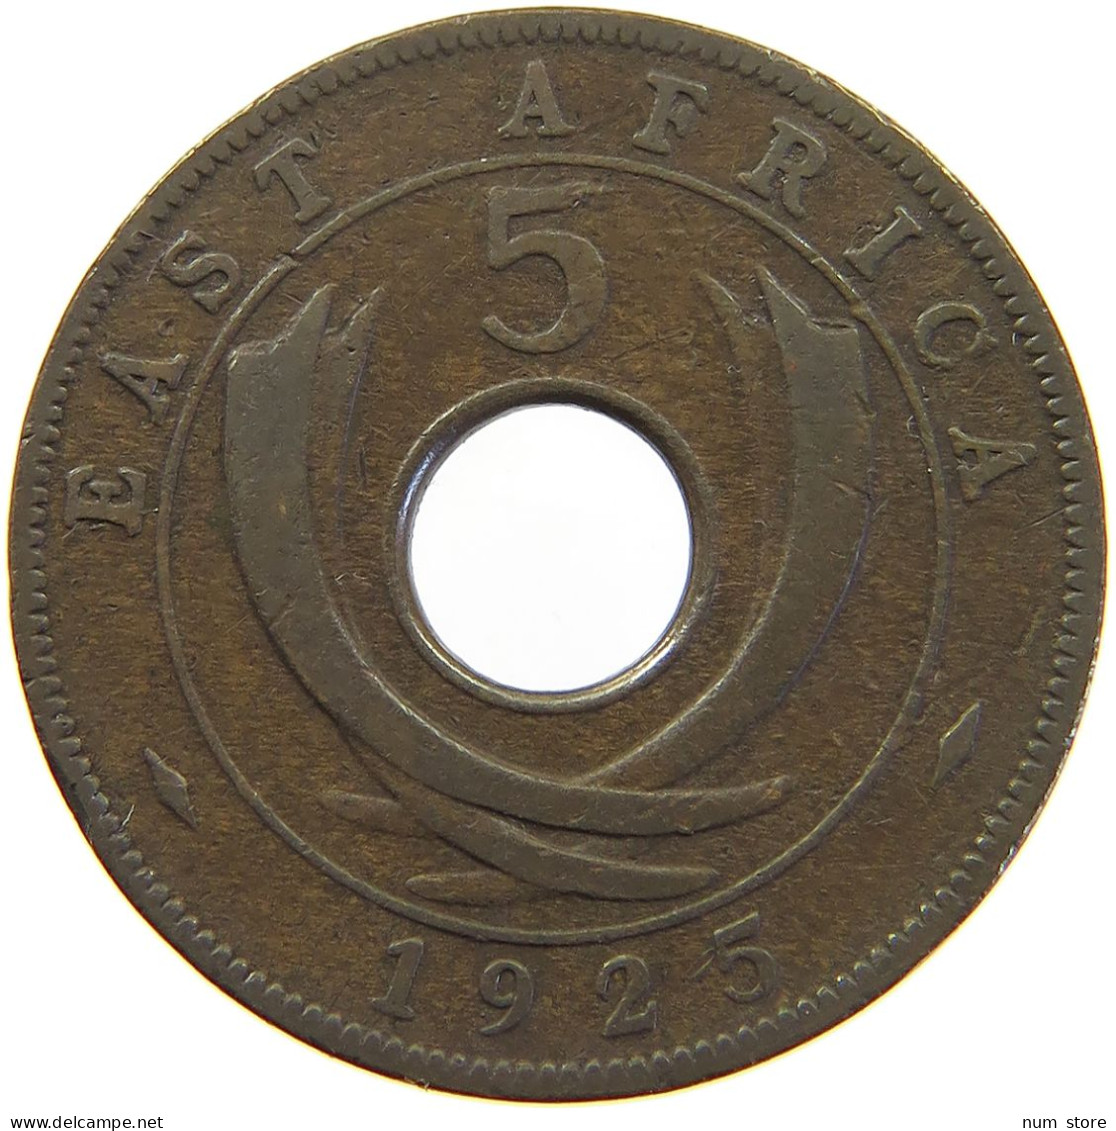 EAST AFRICA 5 CENTS 1925 GEORGE V. (1910-1936) #MA 065522 - Colonia Britannica